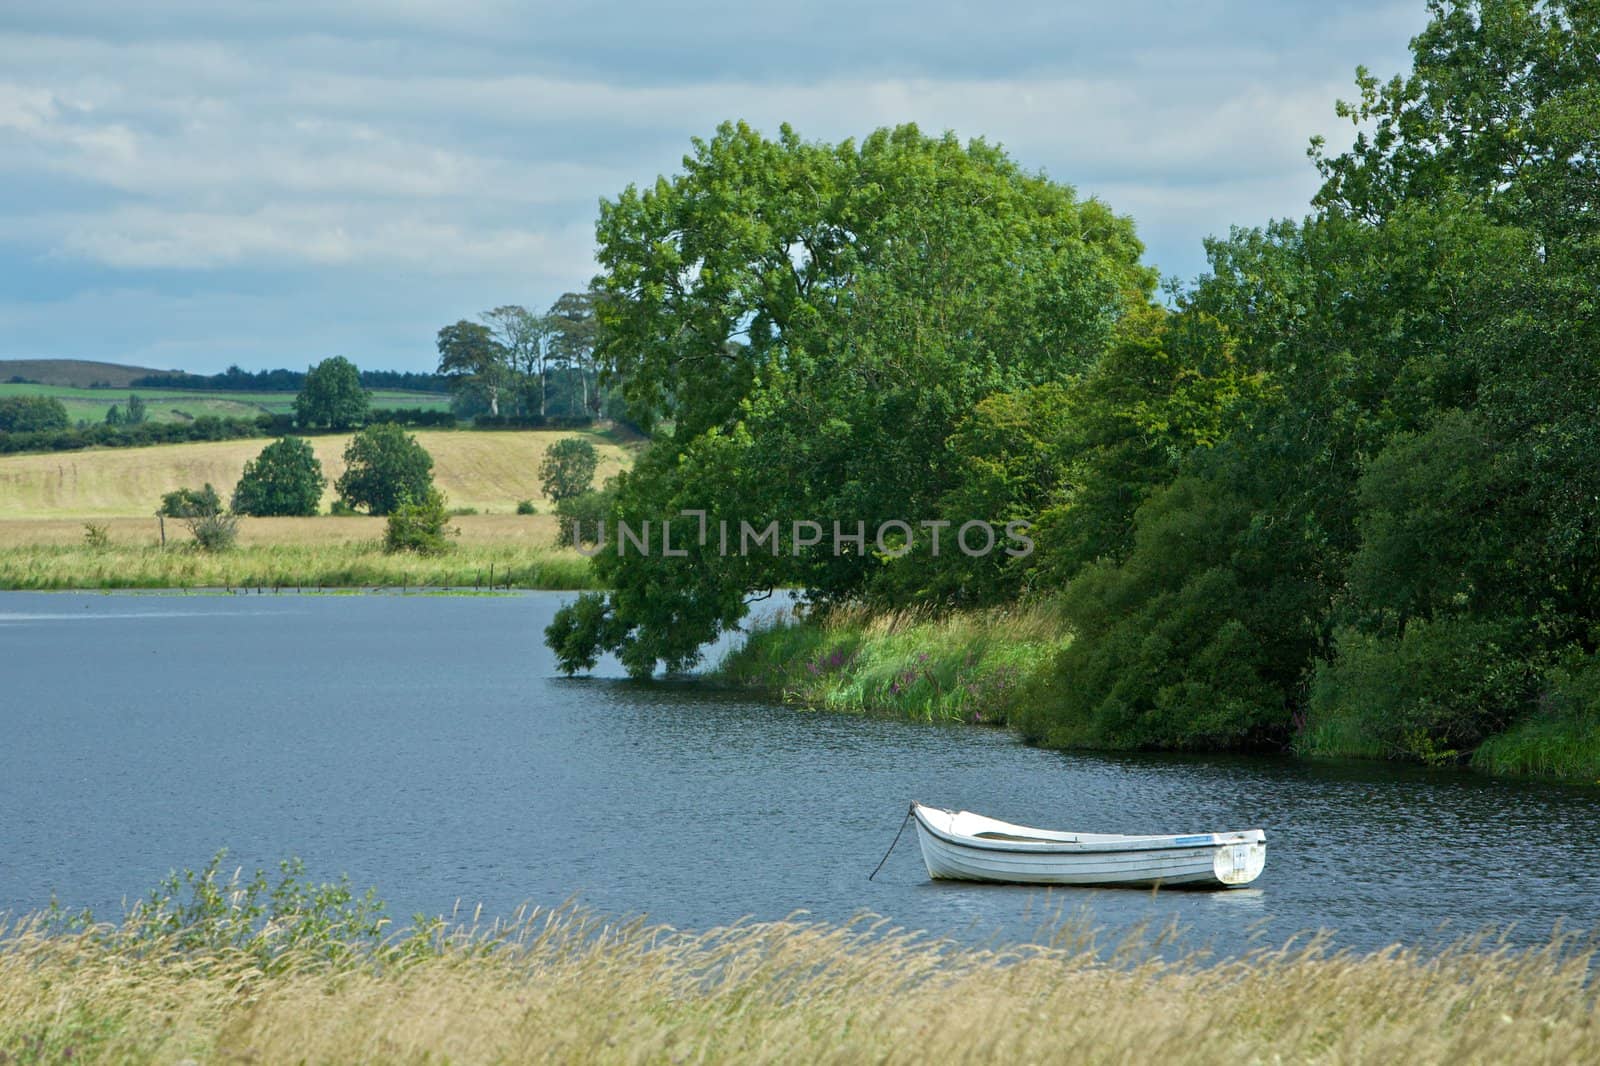 Beautiful scenic countryside with a boat on a lake in Scotland